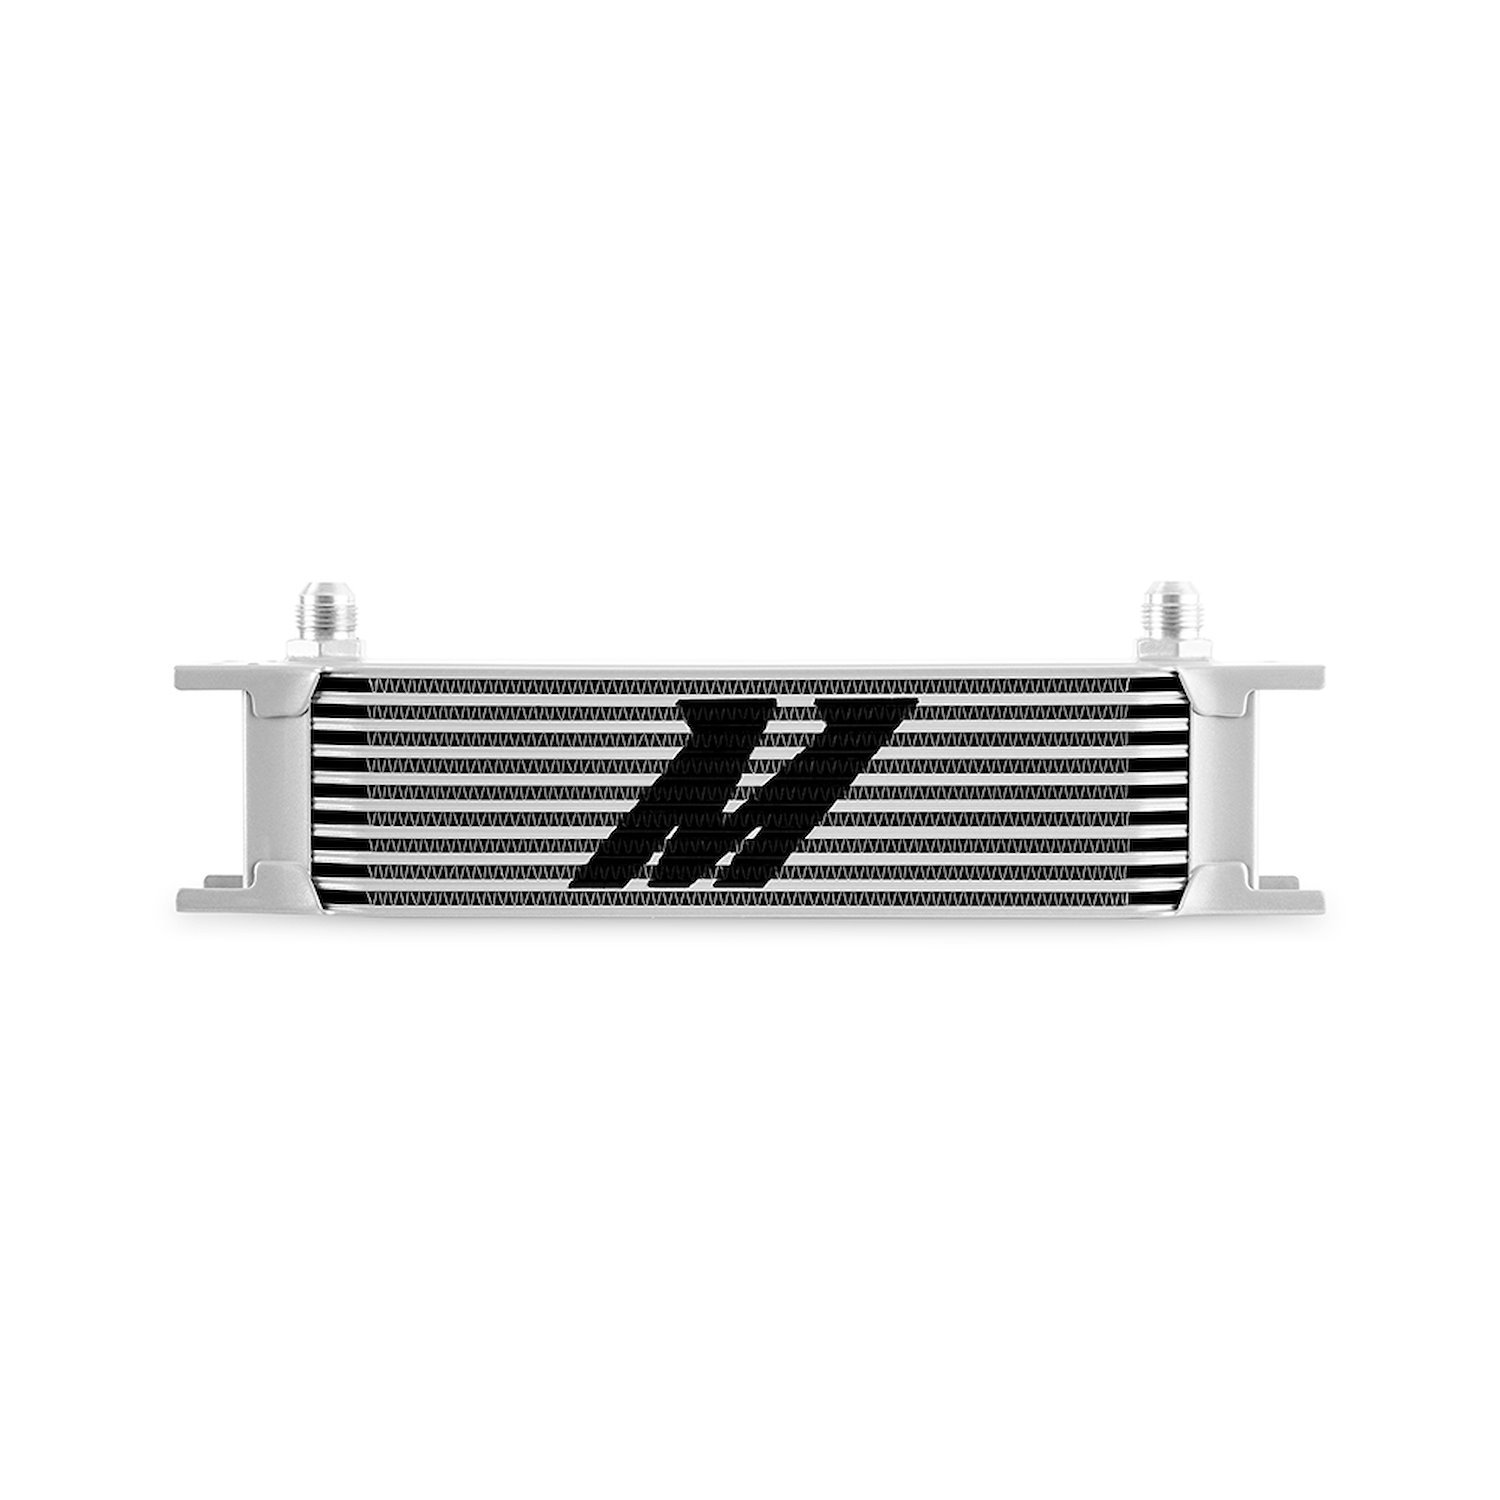 MMOC-10-8SL Universal 10-Row Oil Cooler, -8AN